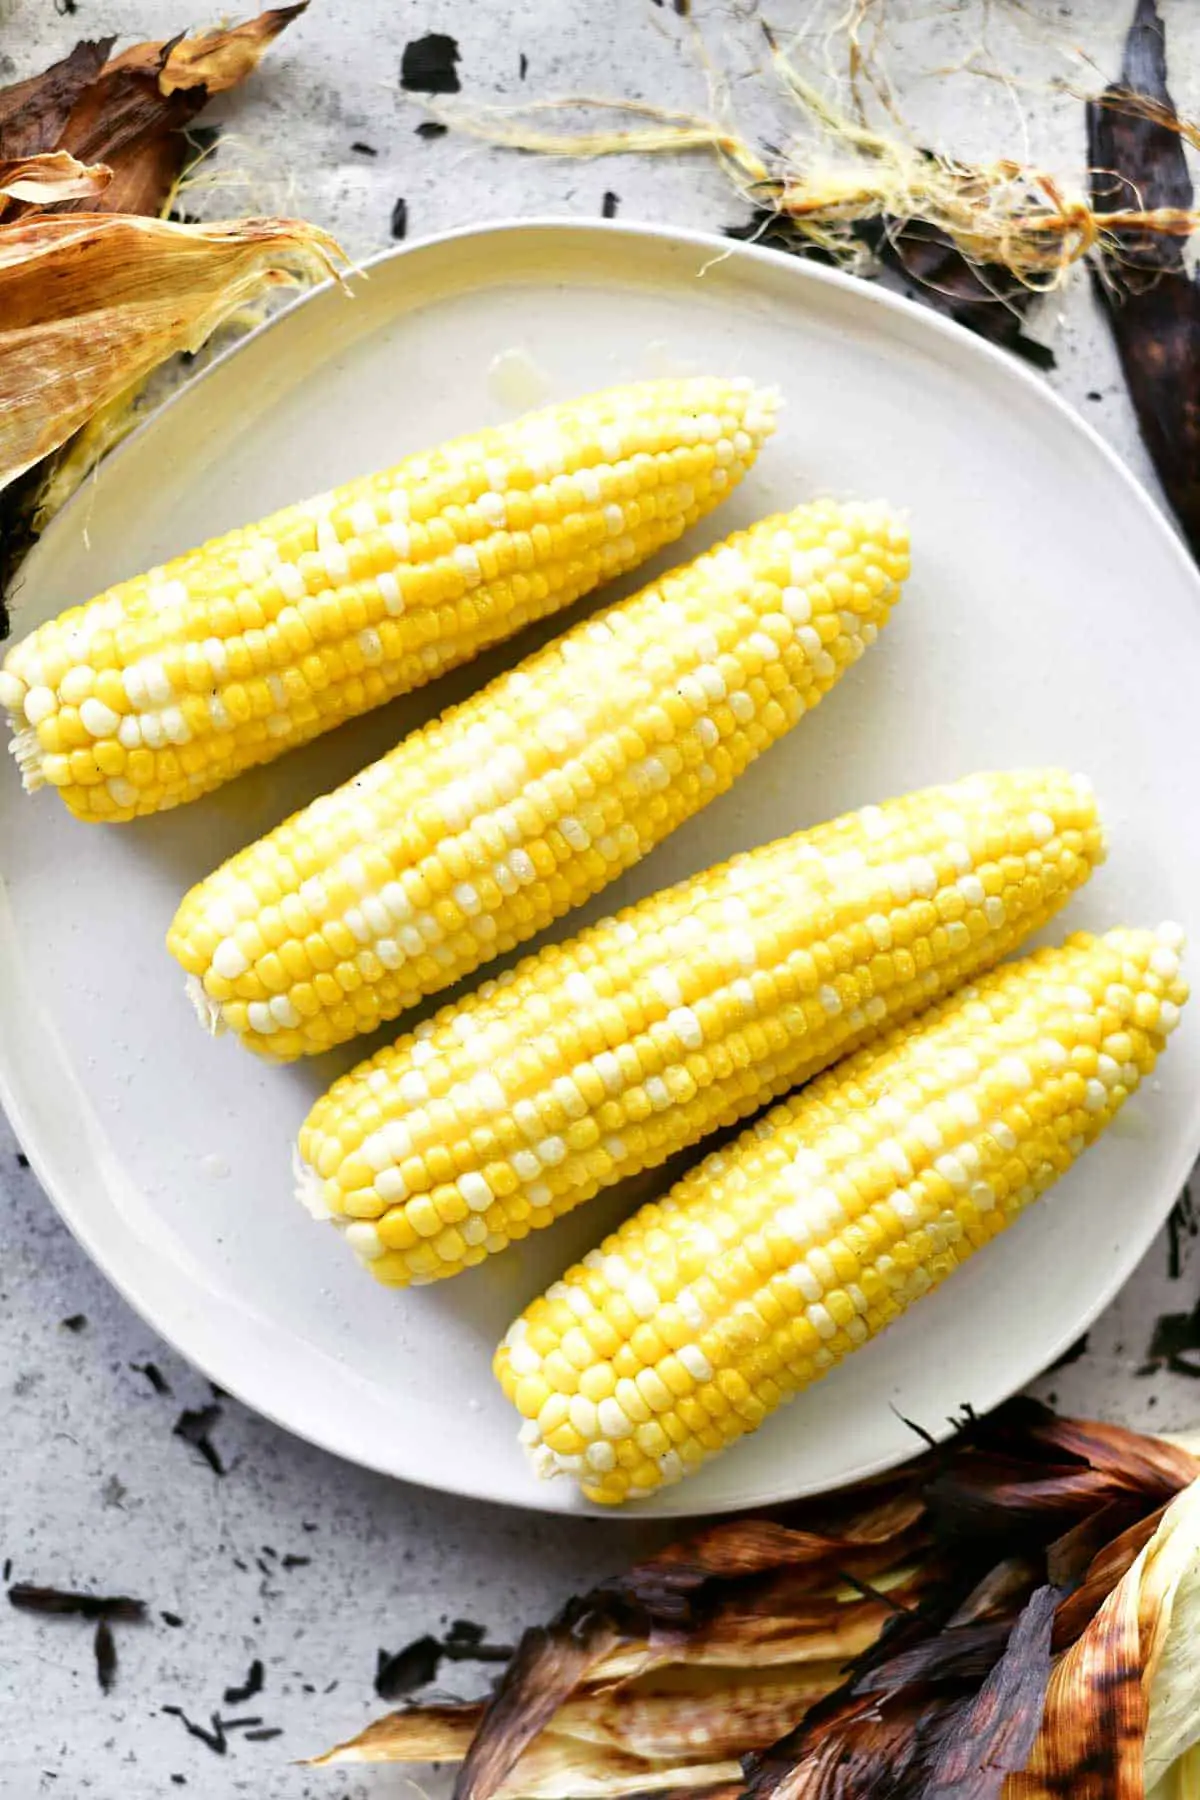 How To Grill Corn On The Cob With The Husks